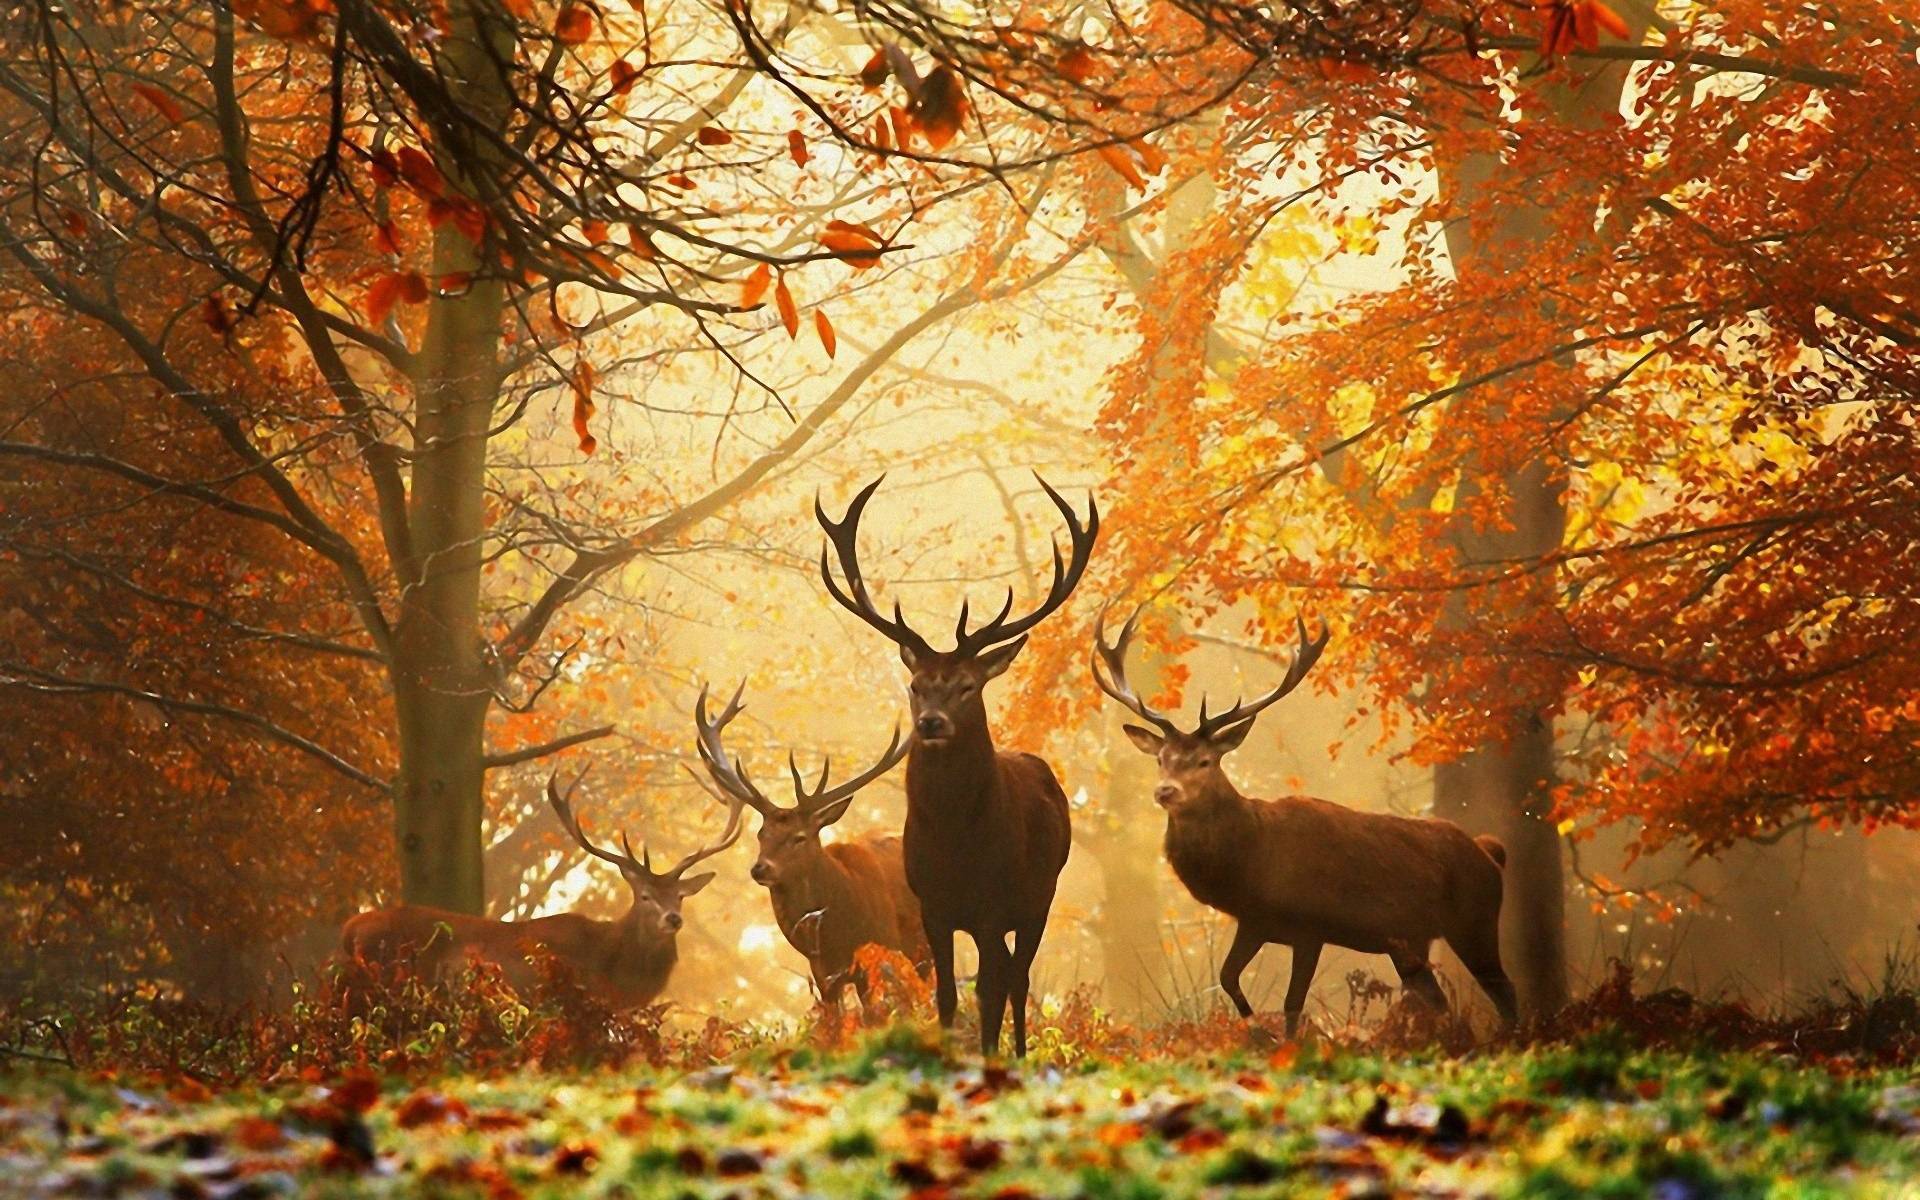 Deer in the woods wallpaper and image, picture, photo